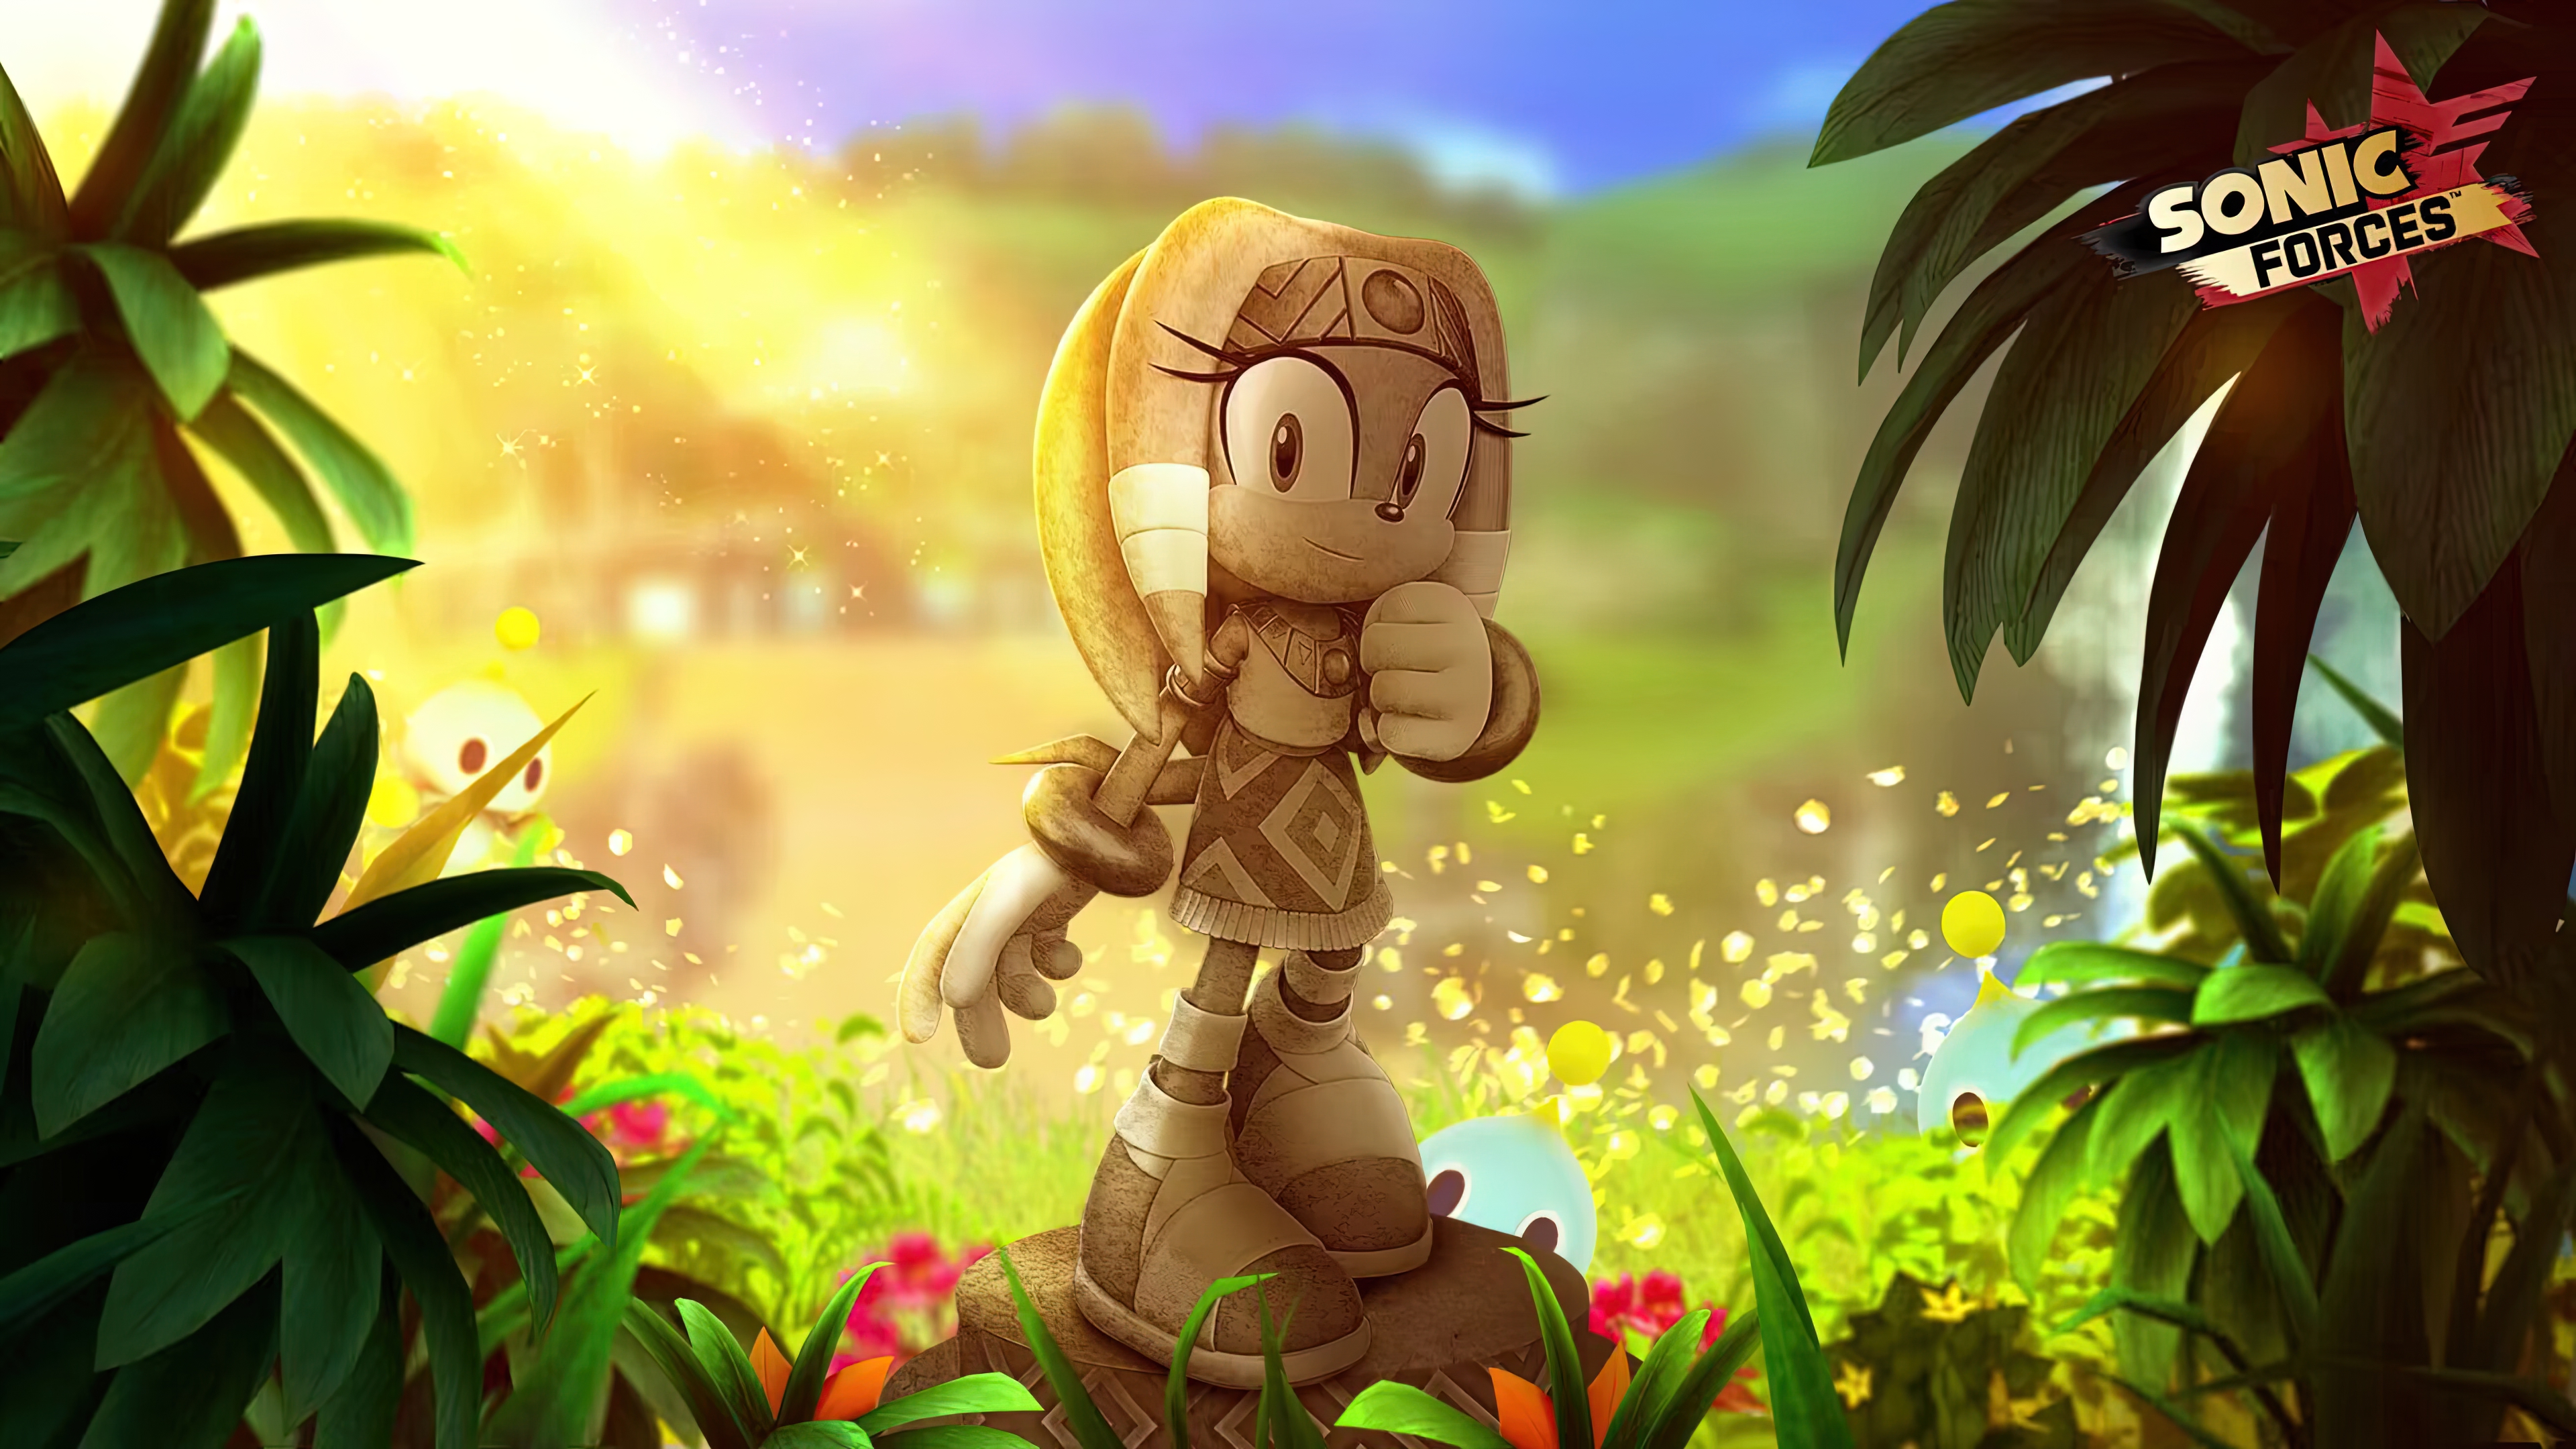 General 3840x2160 sonic forces Sonic Sonic the Hedgehog Sega video game art artwork video game characters PC gaming Tikal chao sculpture logo digital art